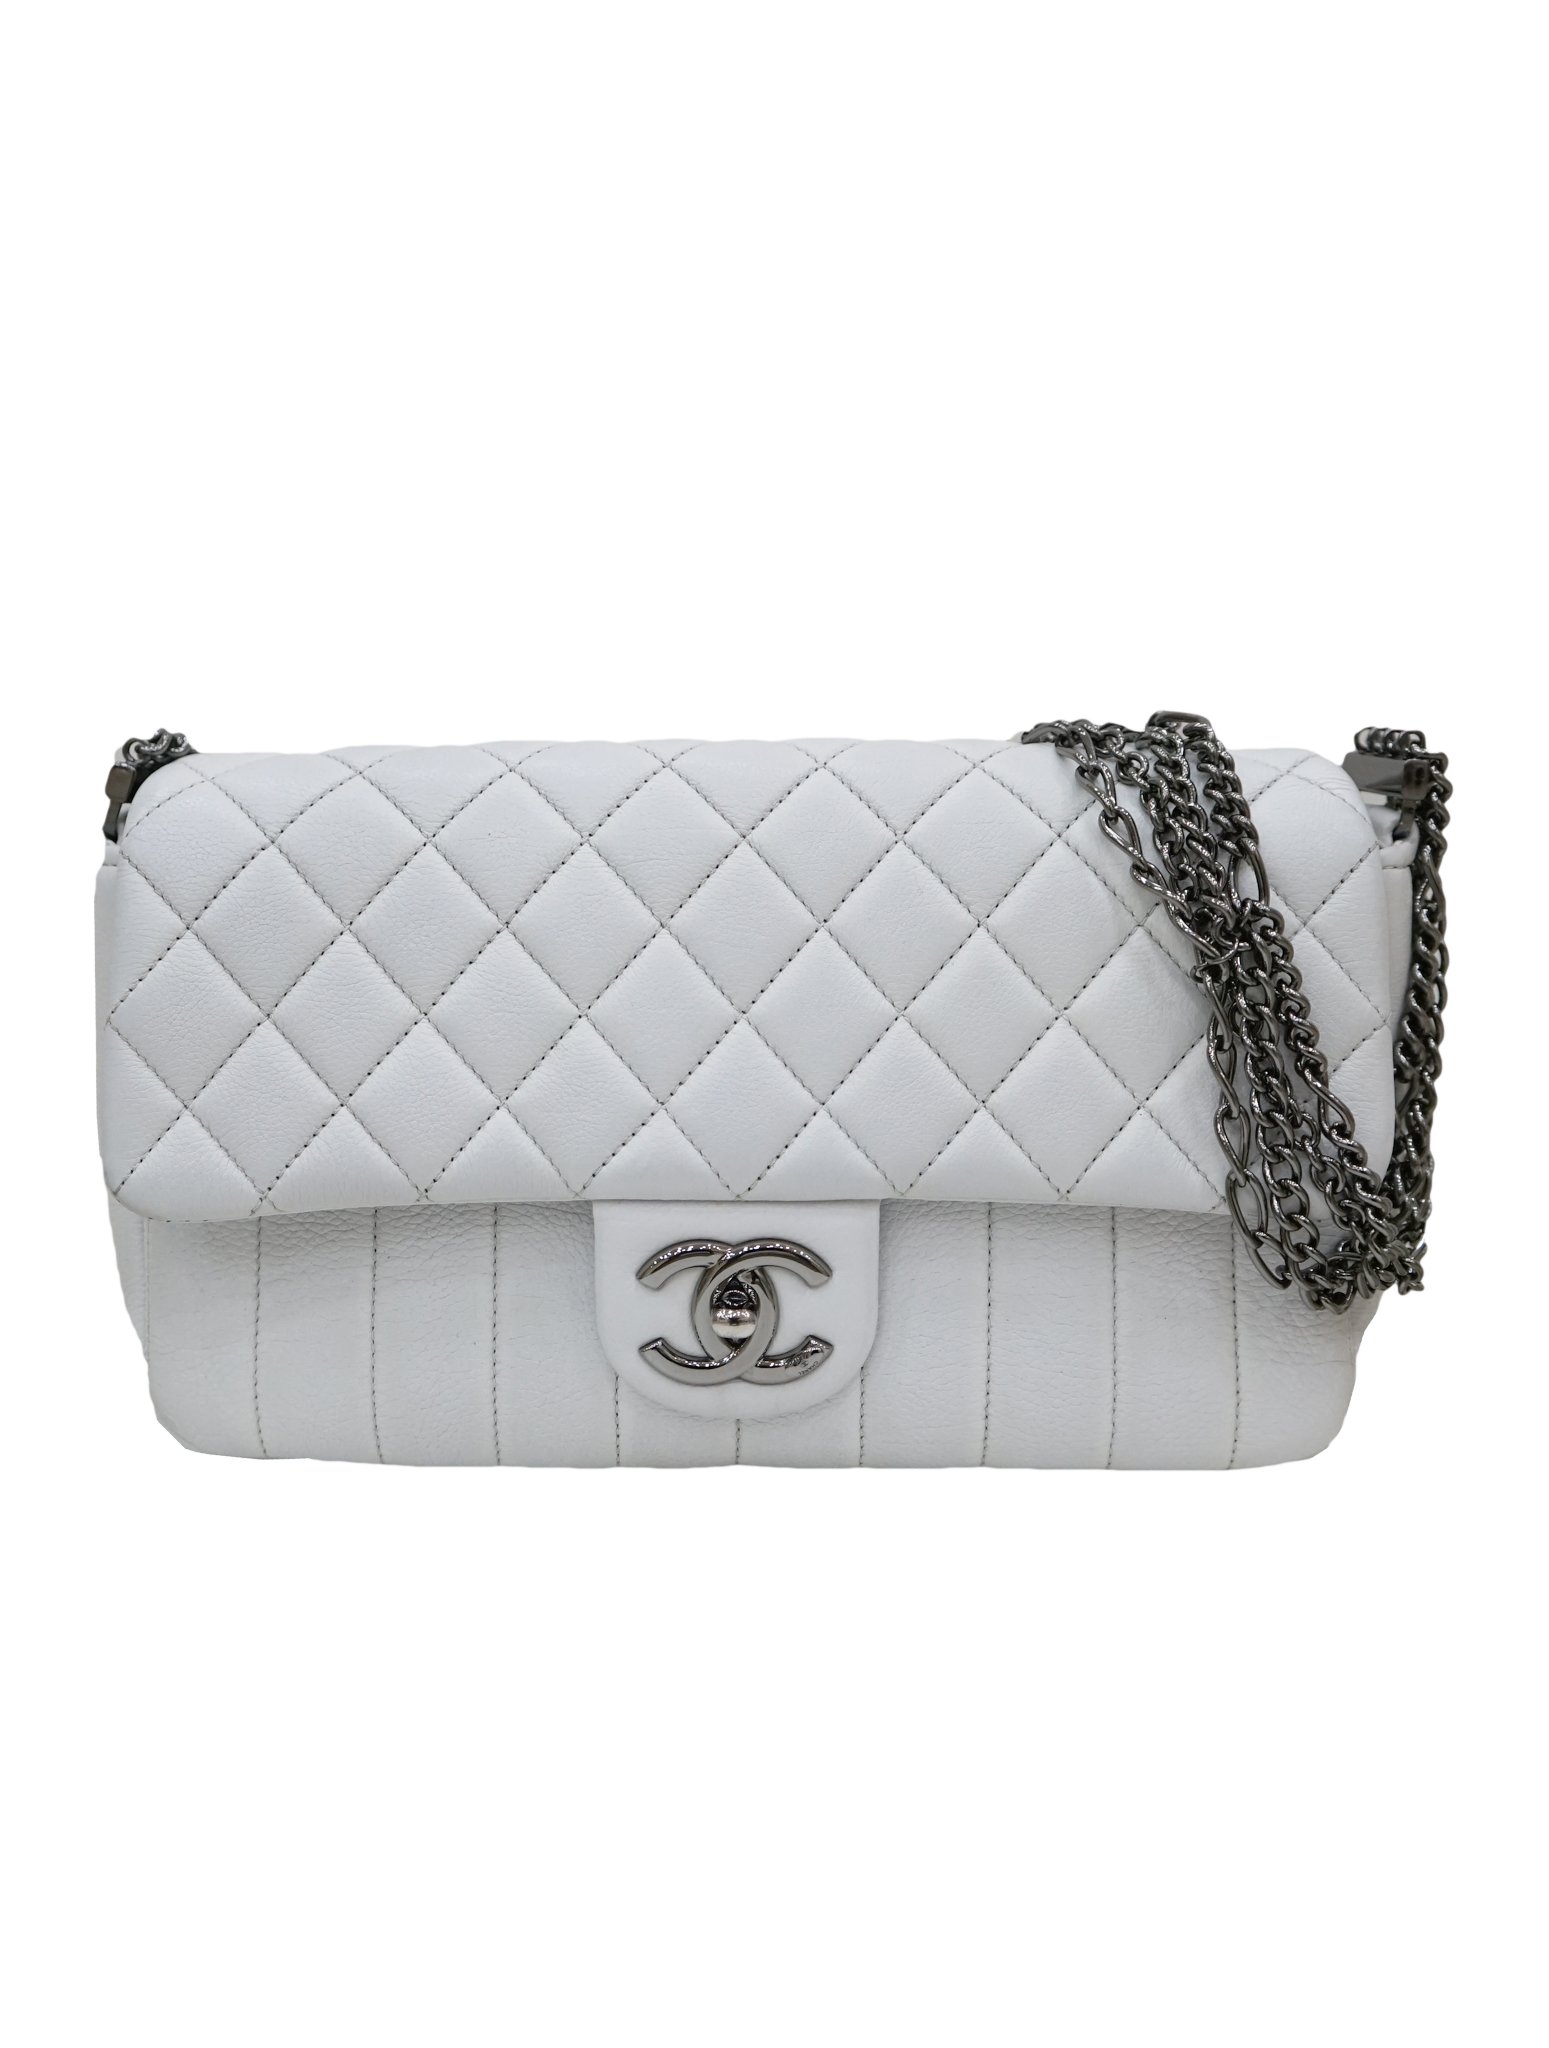 QUILTED LEATHER MULTI CHAIN FLAP BAG - styleforless